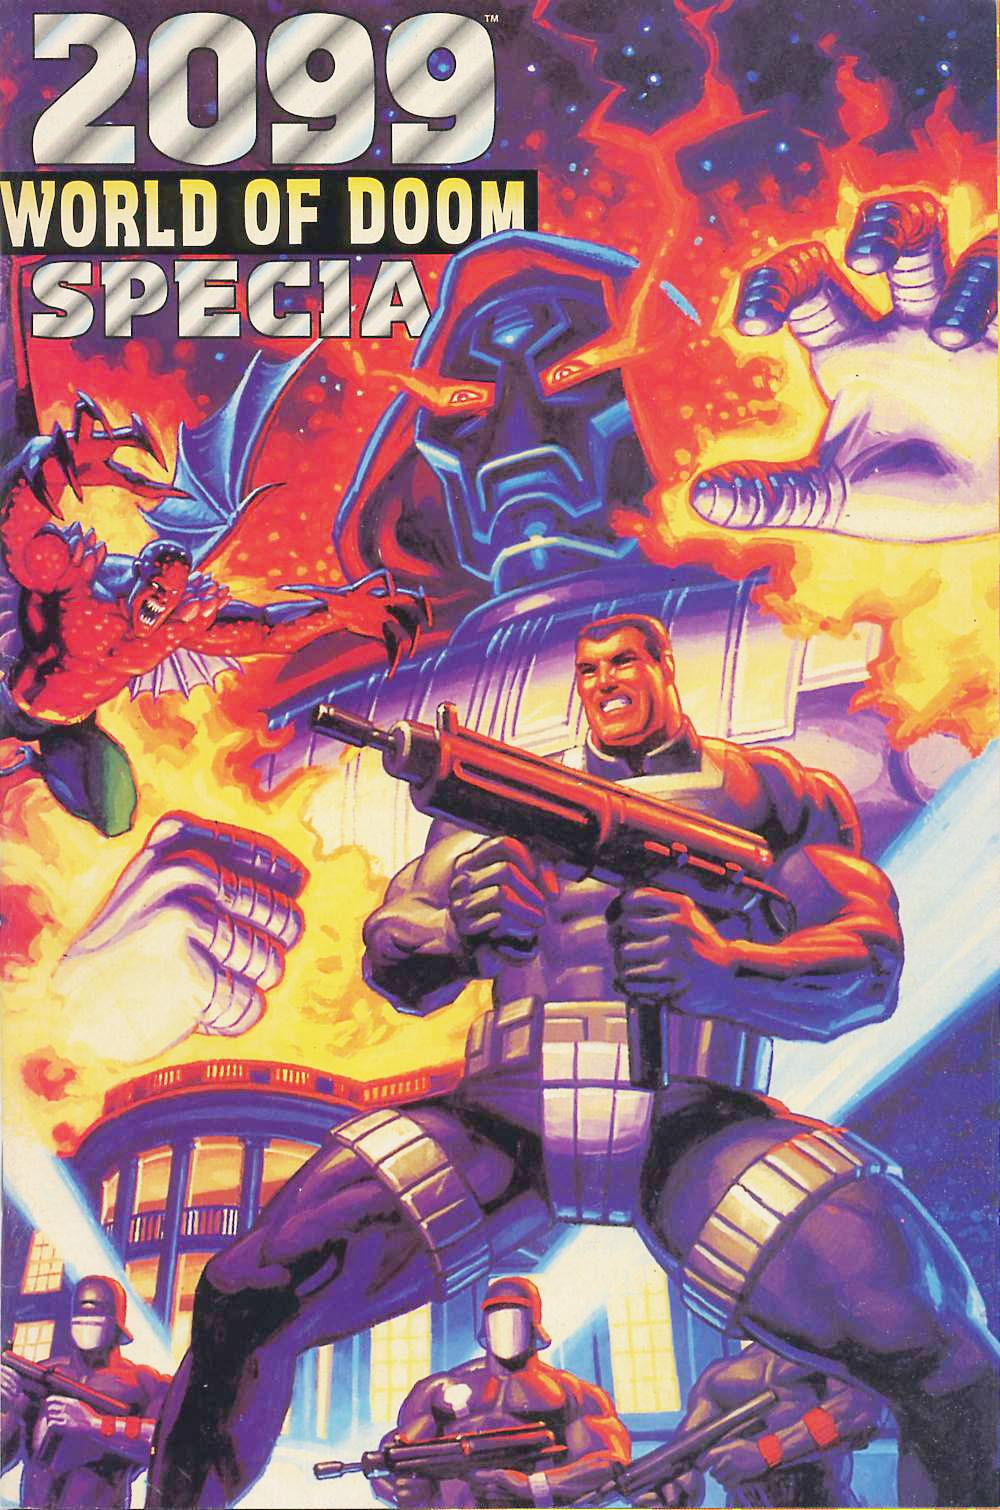 2099 Special: The World of Doom Vol. 1 #1